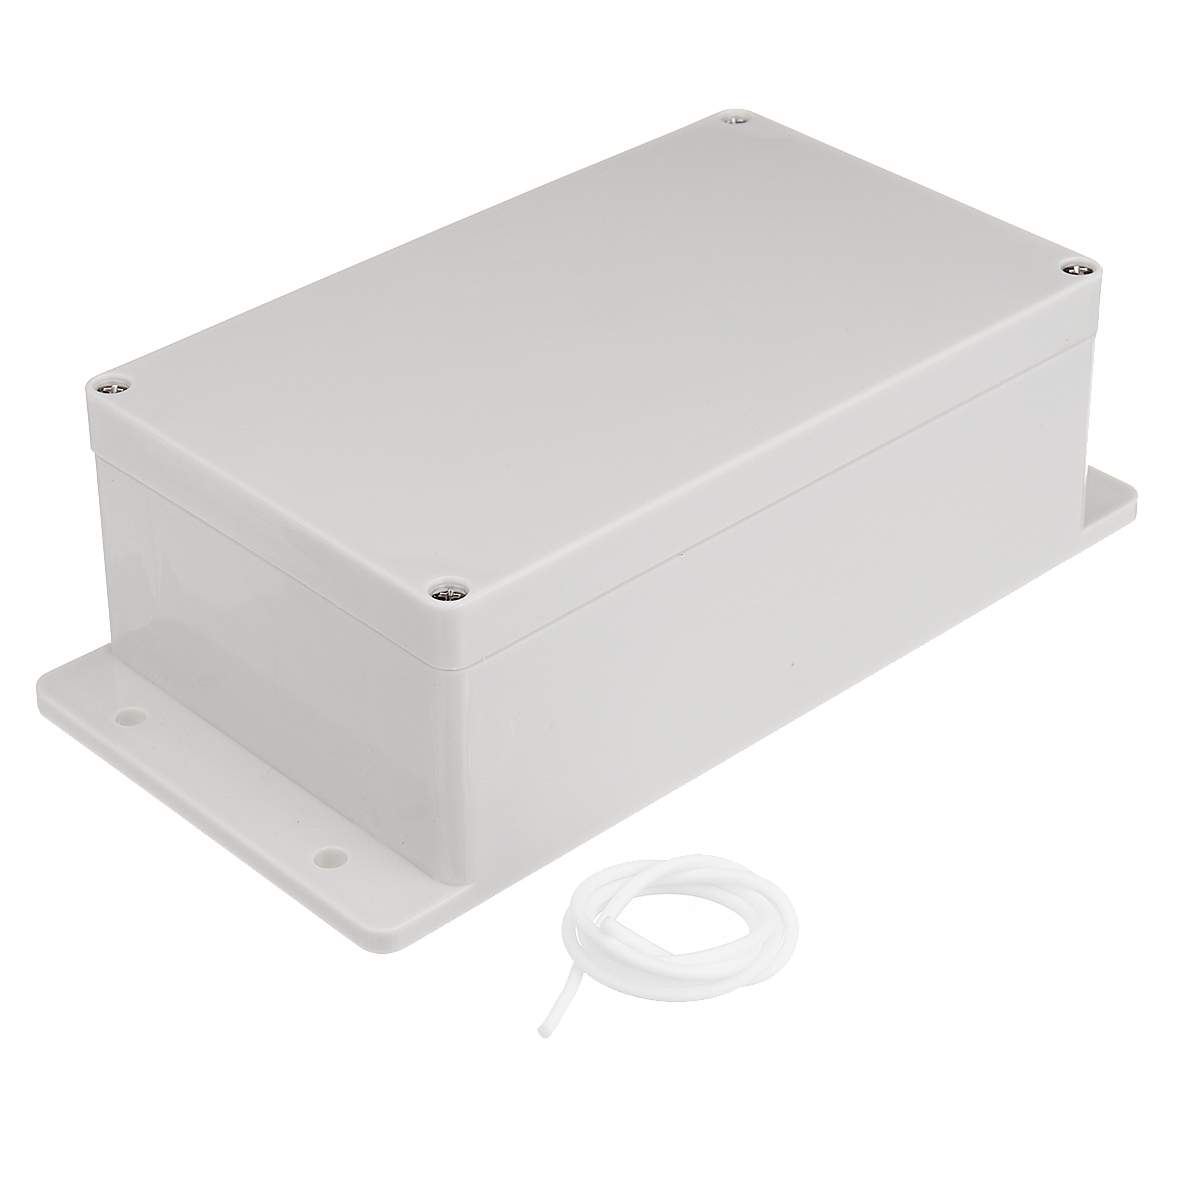 Waterproof-Plastic-Enclosure-Box-Electronic-Project-Case-Electrical-Project-Box-Outdoor-Junction-Box-1678840-10